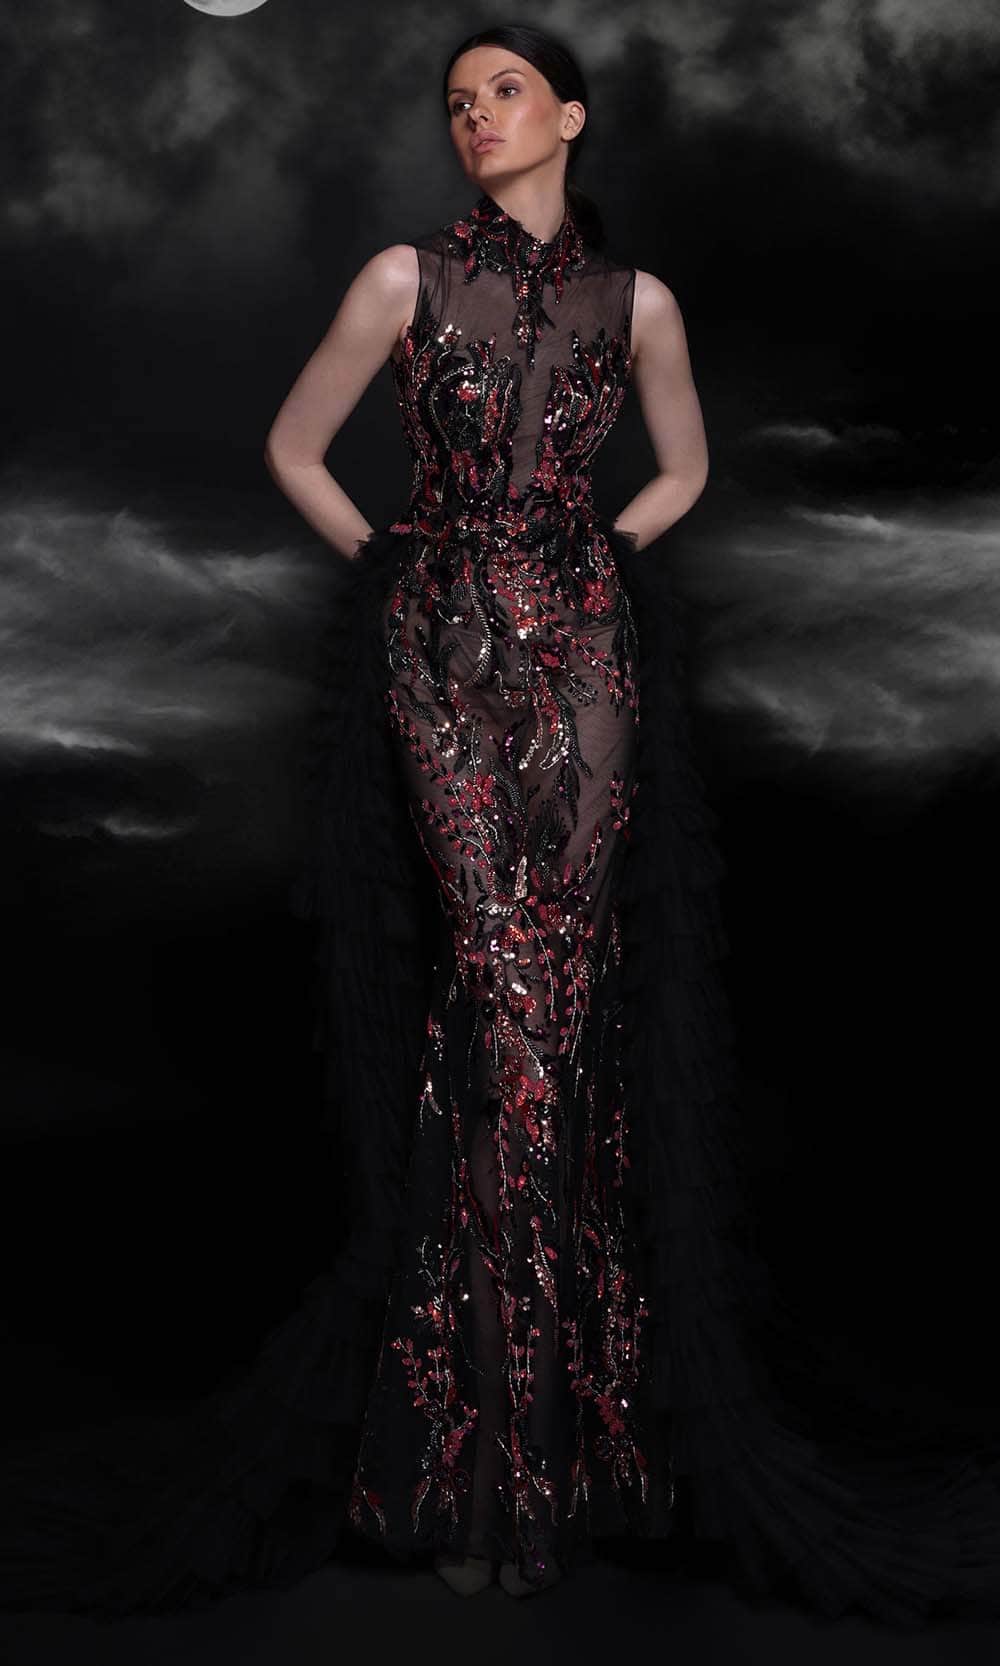 MNM Couture K4099 - Sleeveless Beaded Illusion Evening Gown
